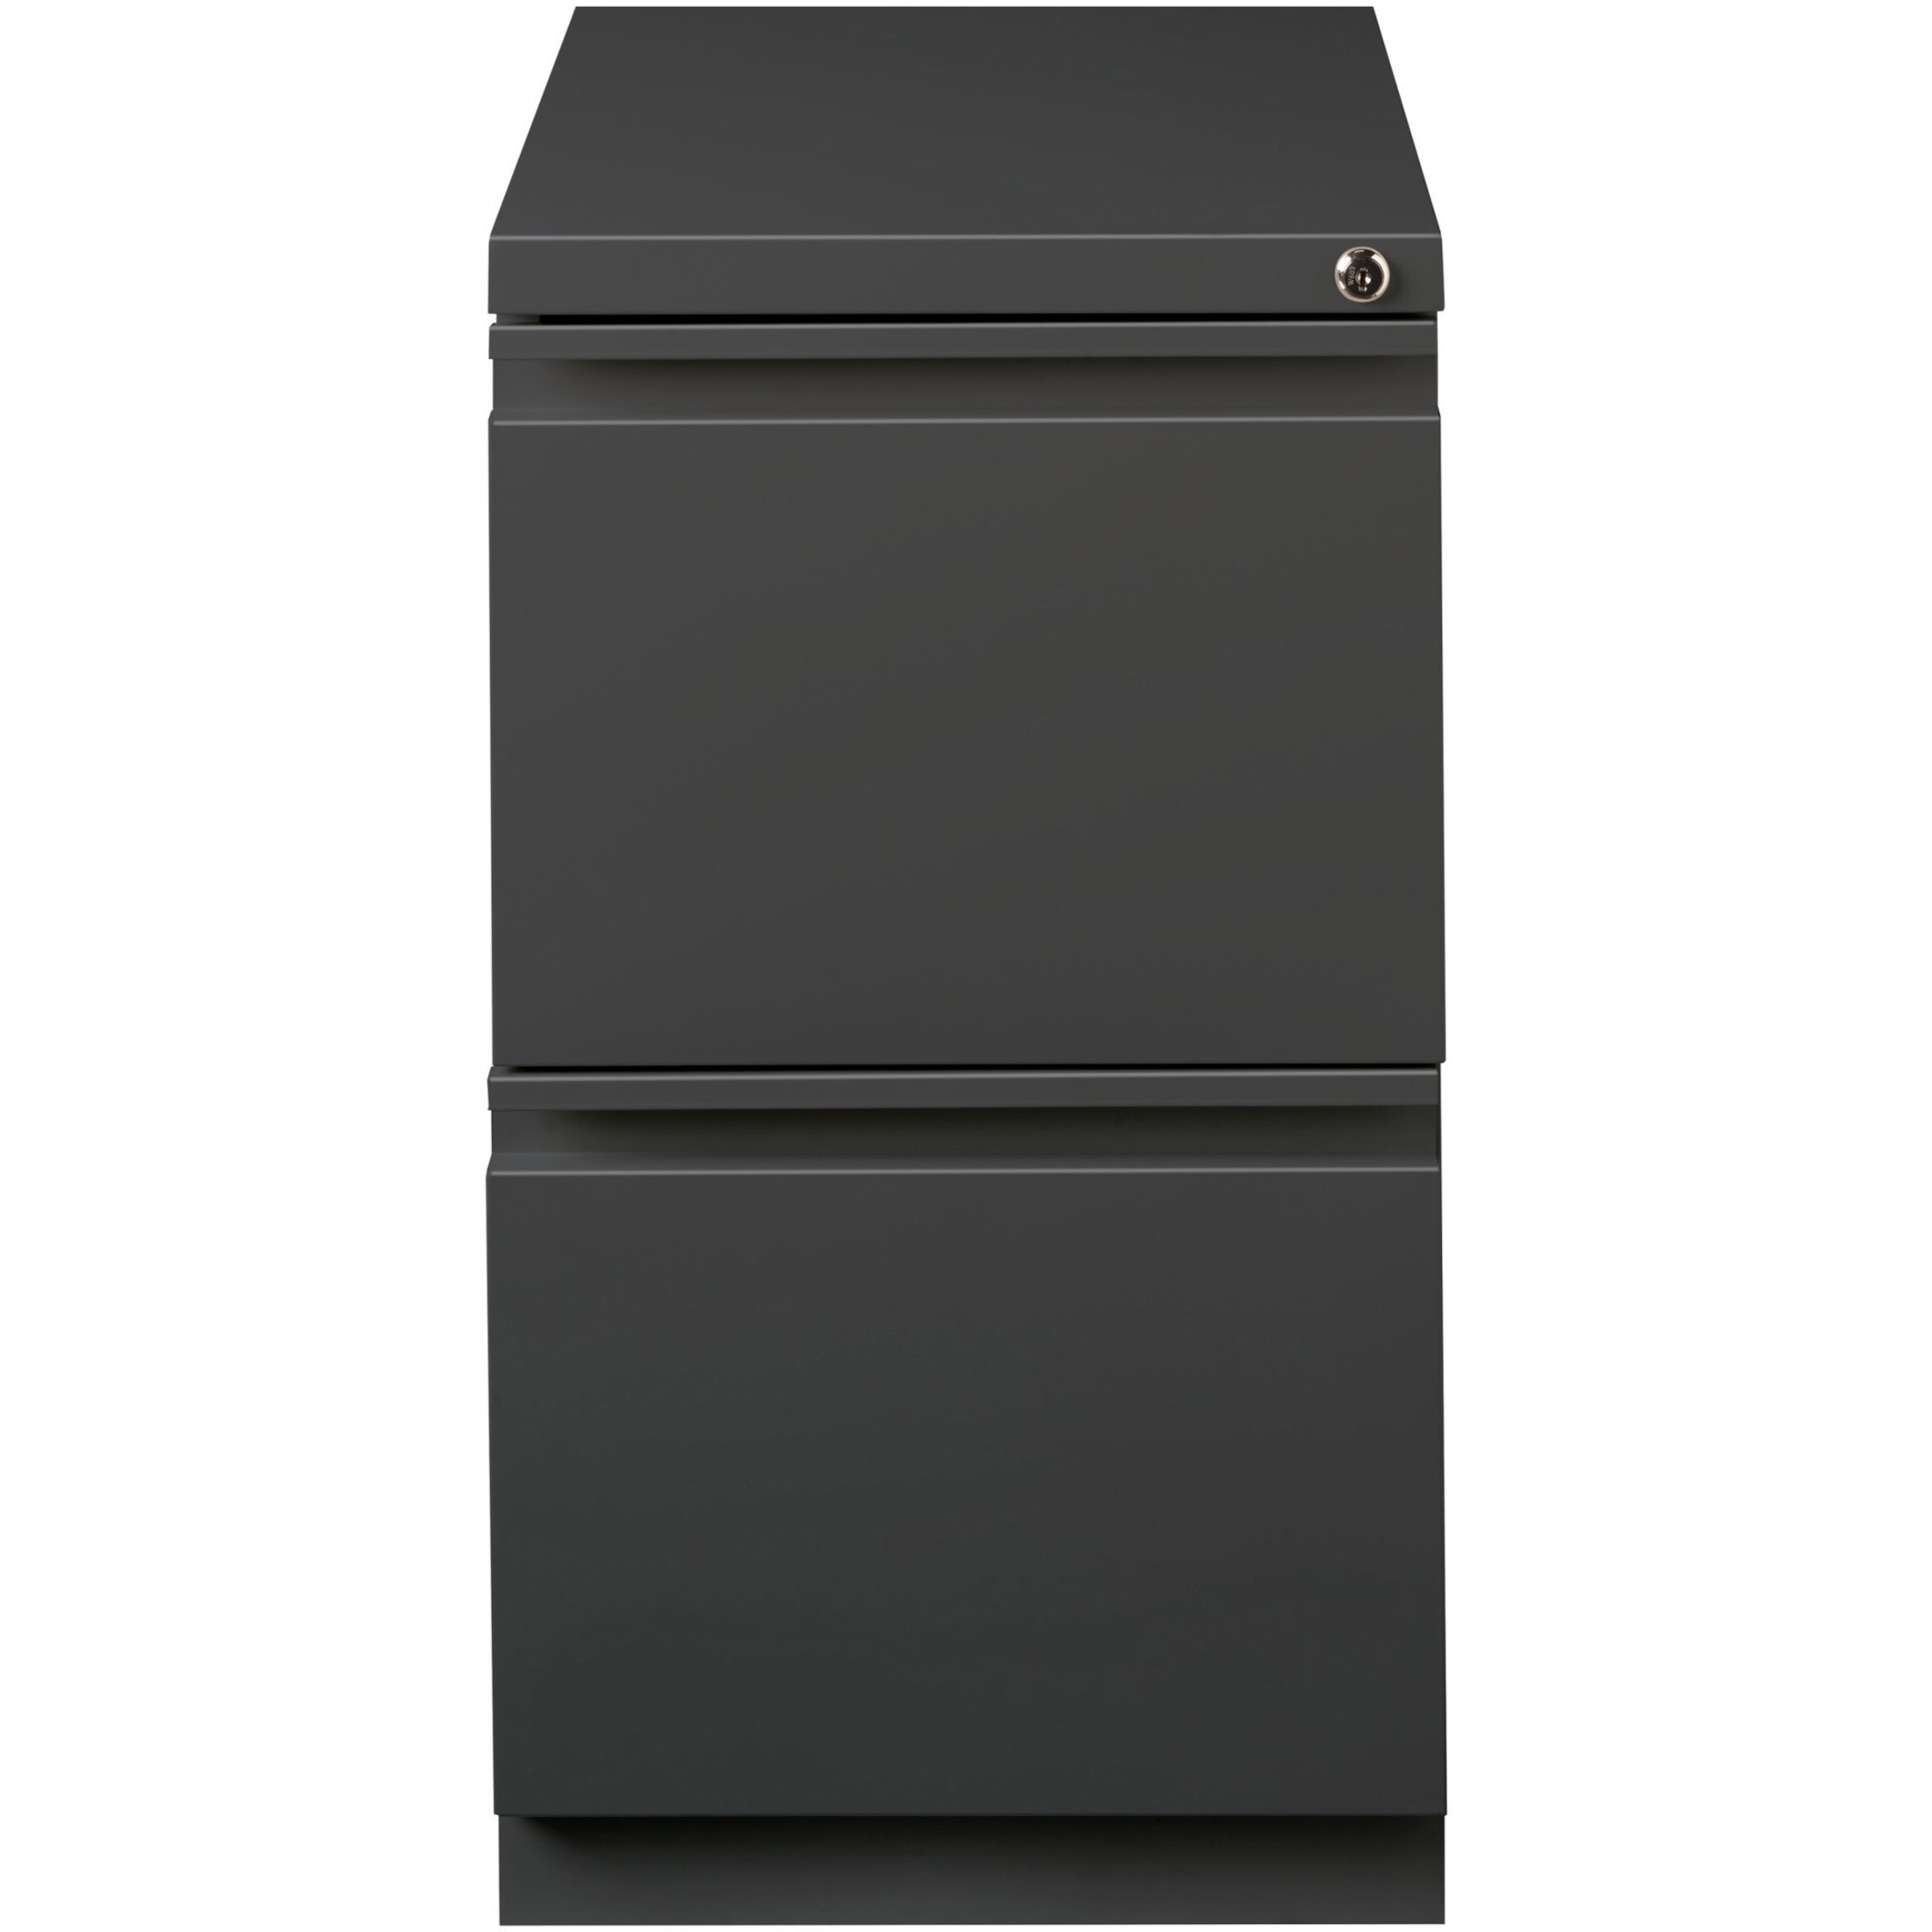 Lorell® 19-7/8"D Vertical 2-Drawer Mobile Pedestal File Cabinet, Charcoal - image 4 of 8